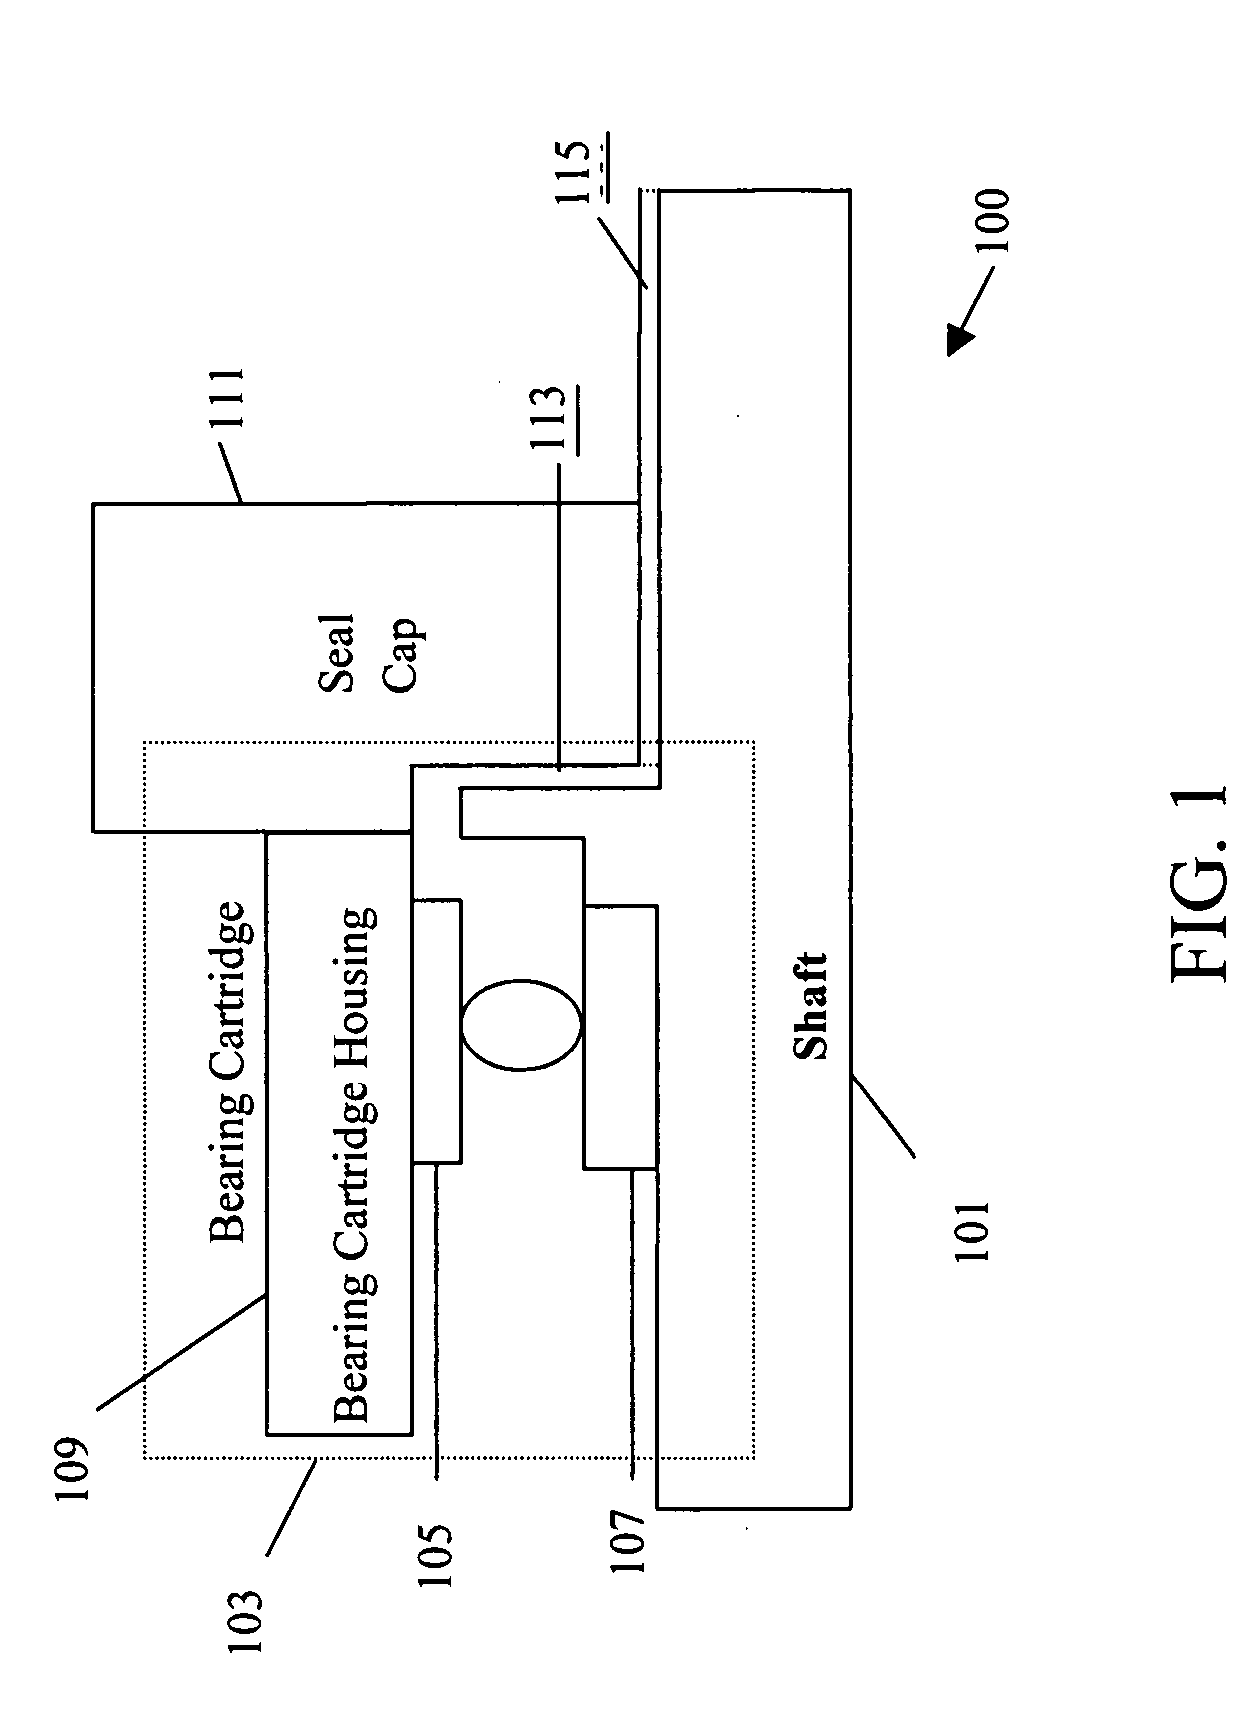 System and method for providing sealing arrangement in X-ray tube